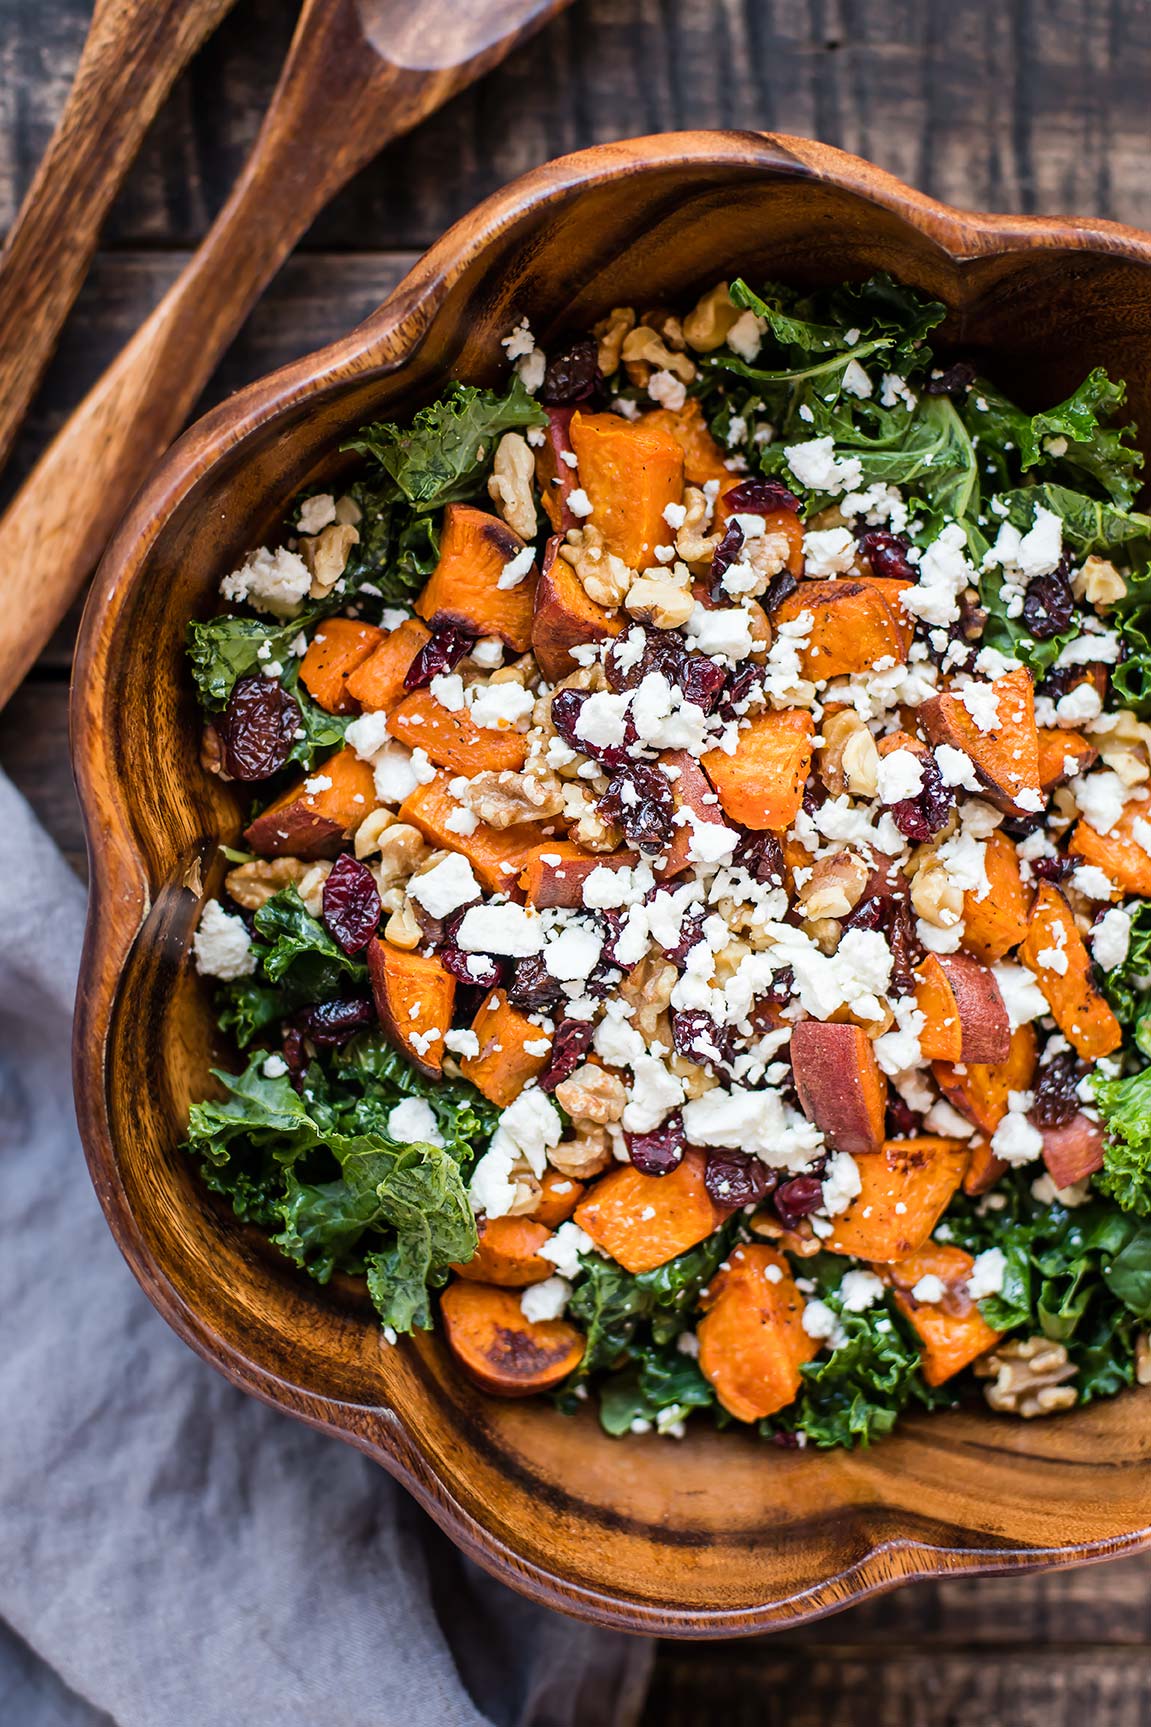 Roasted Sweet Potato Salad With Cranberries Walnuts And Goat Cheese